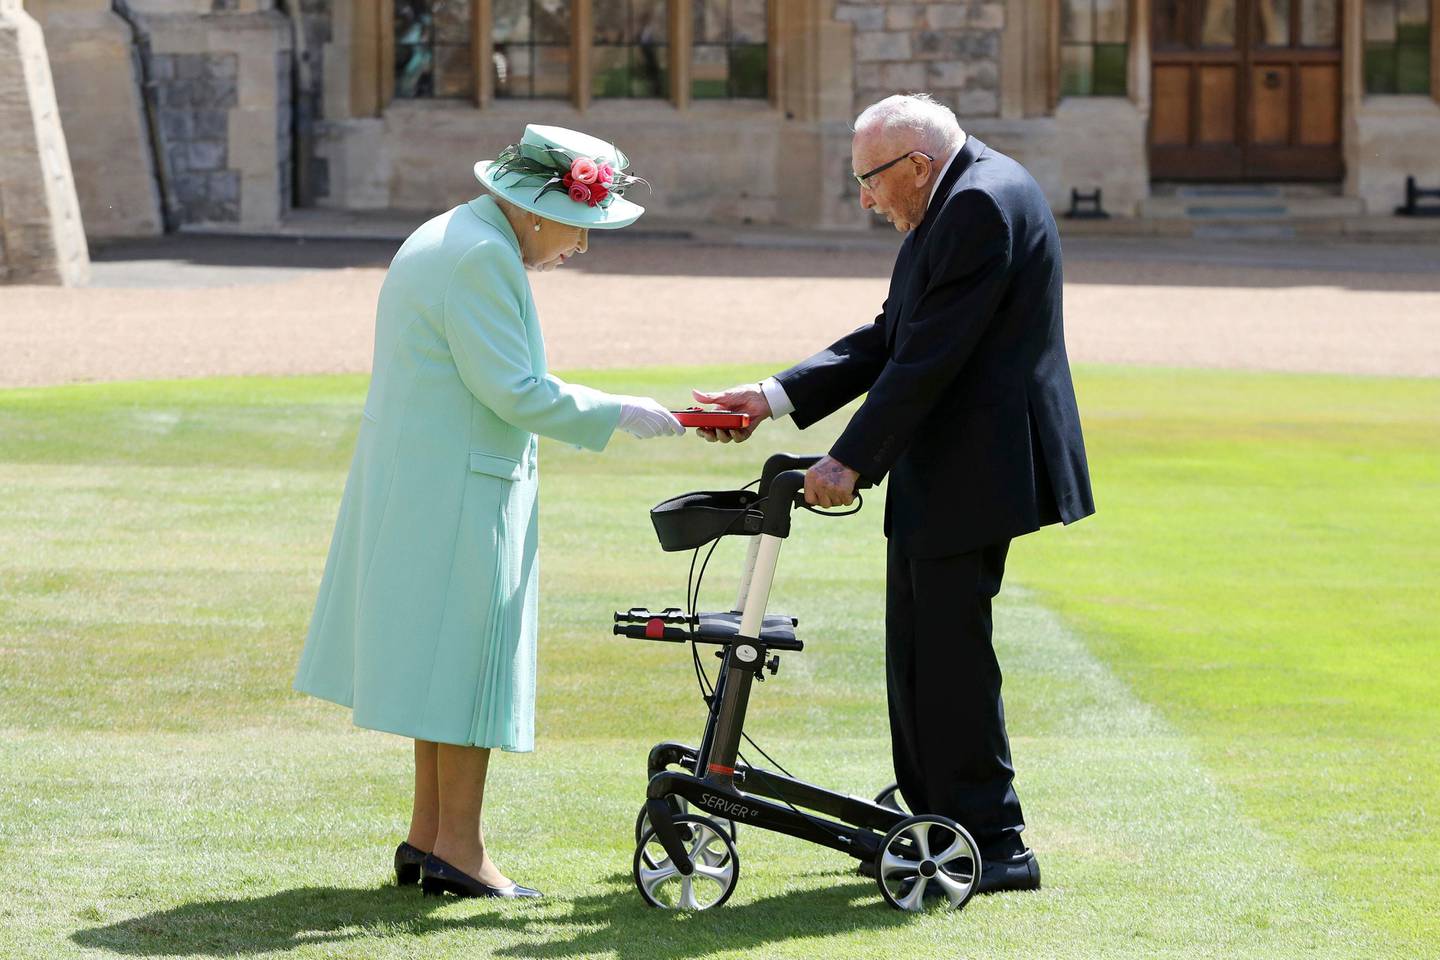 FILE - In this Friday, July 17, 2020 file photo, Captain Sir Thomas Moore receives his knighthood from Britain's Queen Elizabeth, during a ceremony at Windsor Castle in Windsor, England. Tom Moore, the 100-year-old World War II veteran who captivated the British public in the early days of the coronavirus pandemic with his fundraising efforts, has died, Tuesday Feb. 2, 2021. (Chris Jackson/Pool Photo via AP, File)